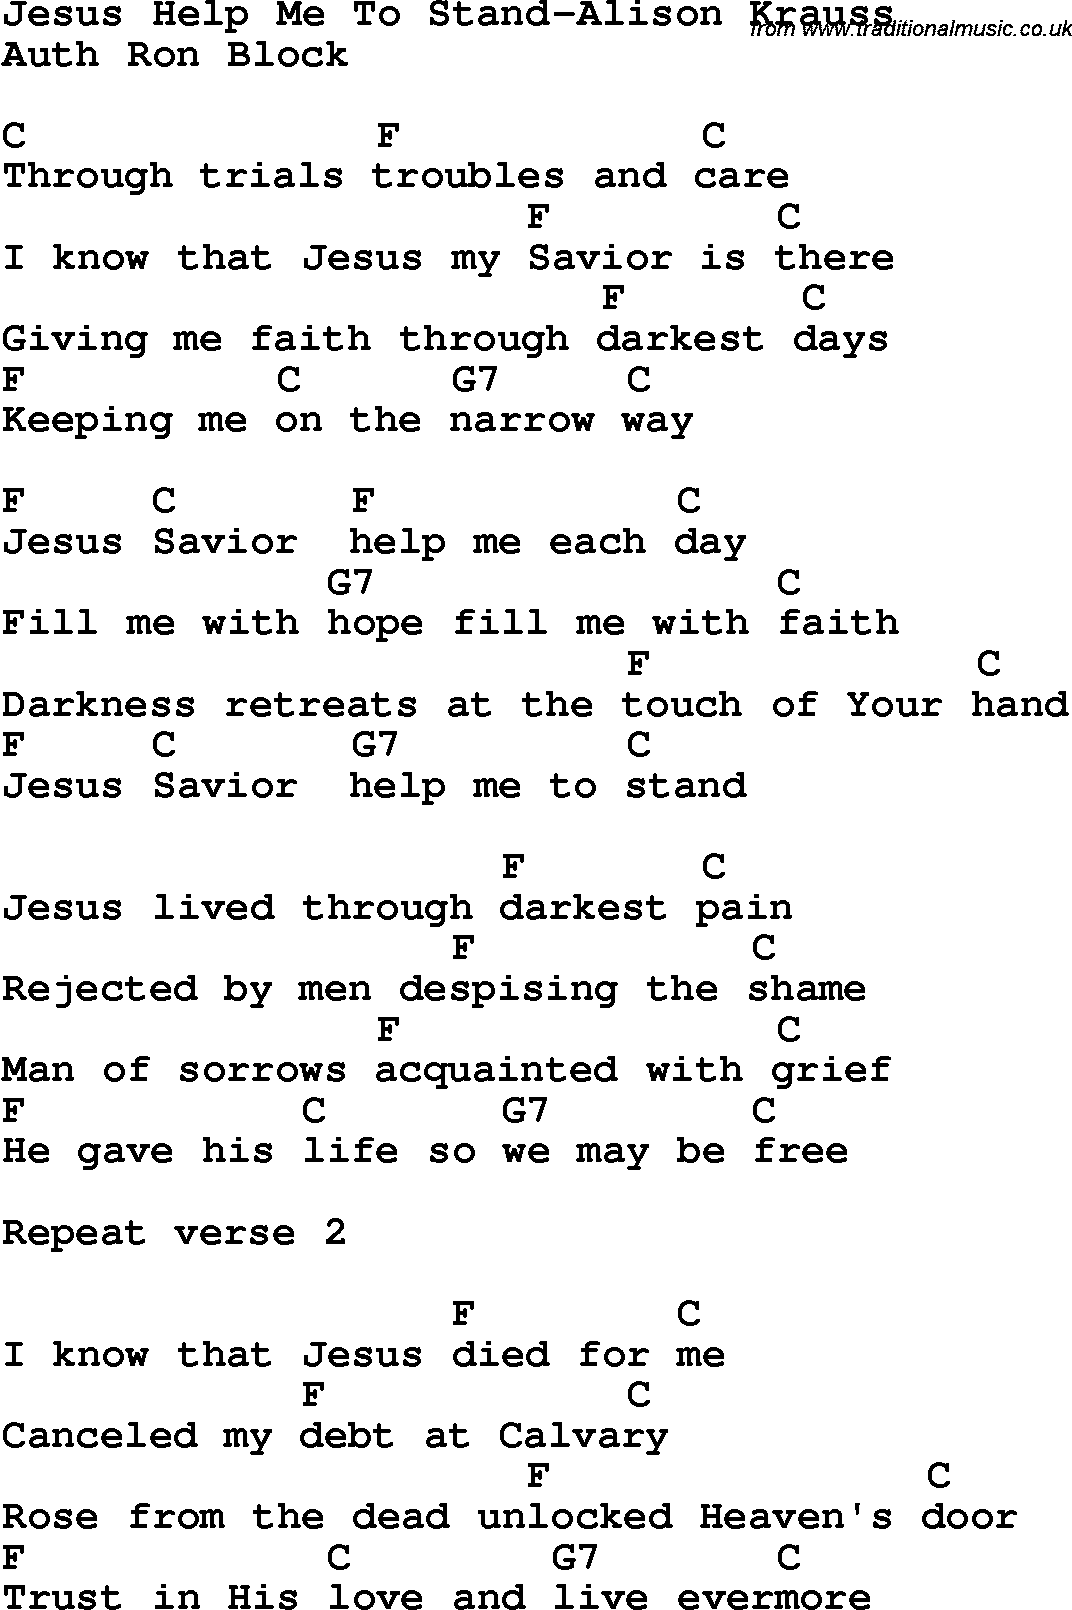 Country, Southern and Bluegrass Gospel Song Jesus Help Me To Stand-Alison Krauss lyrics and chords